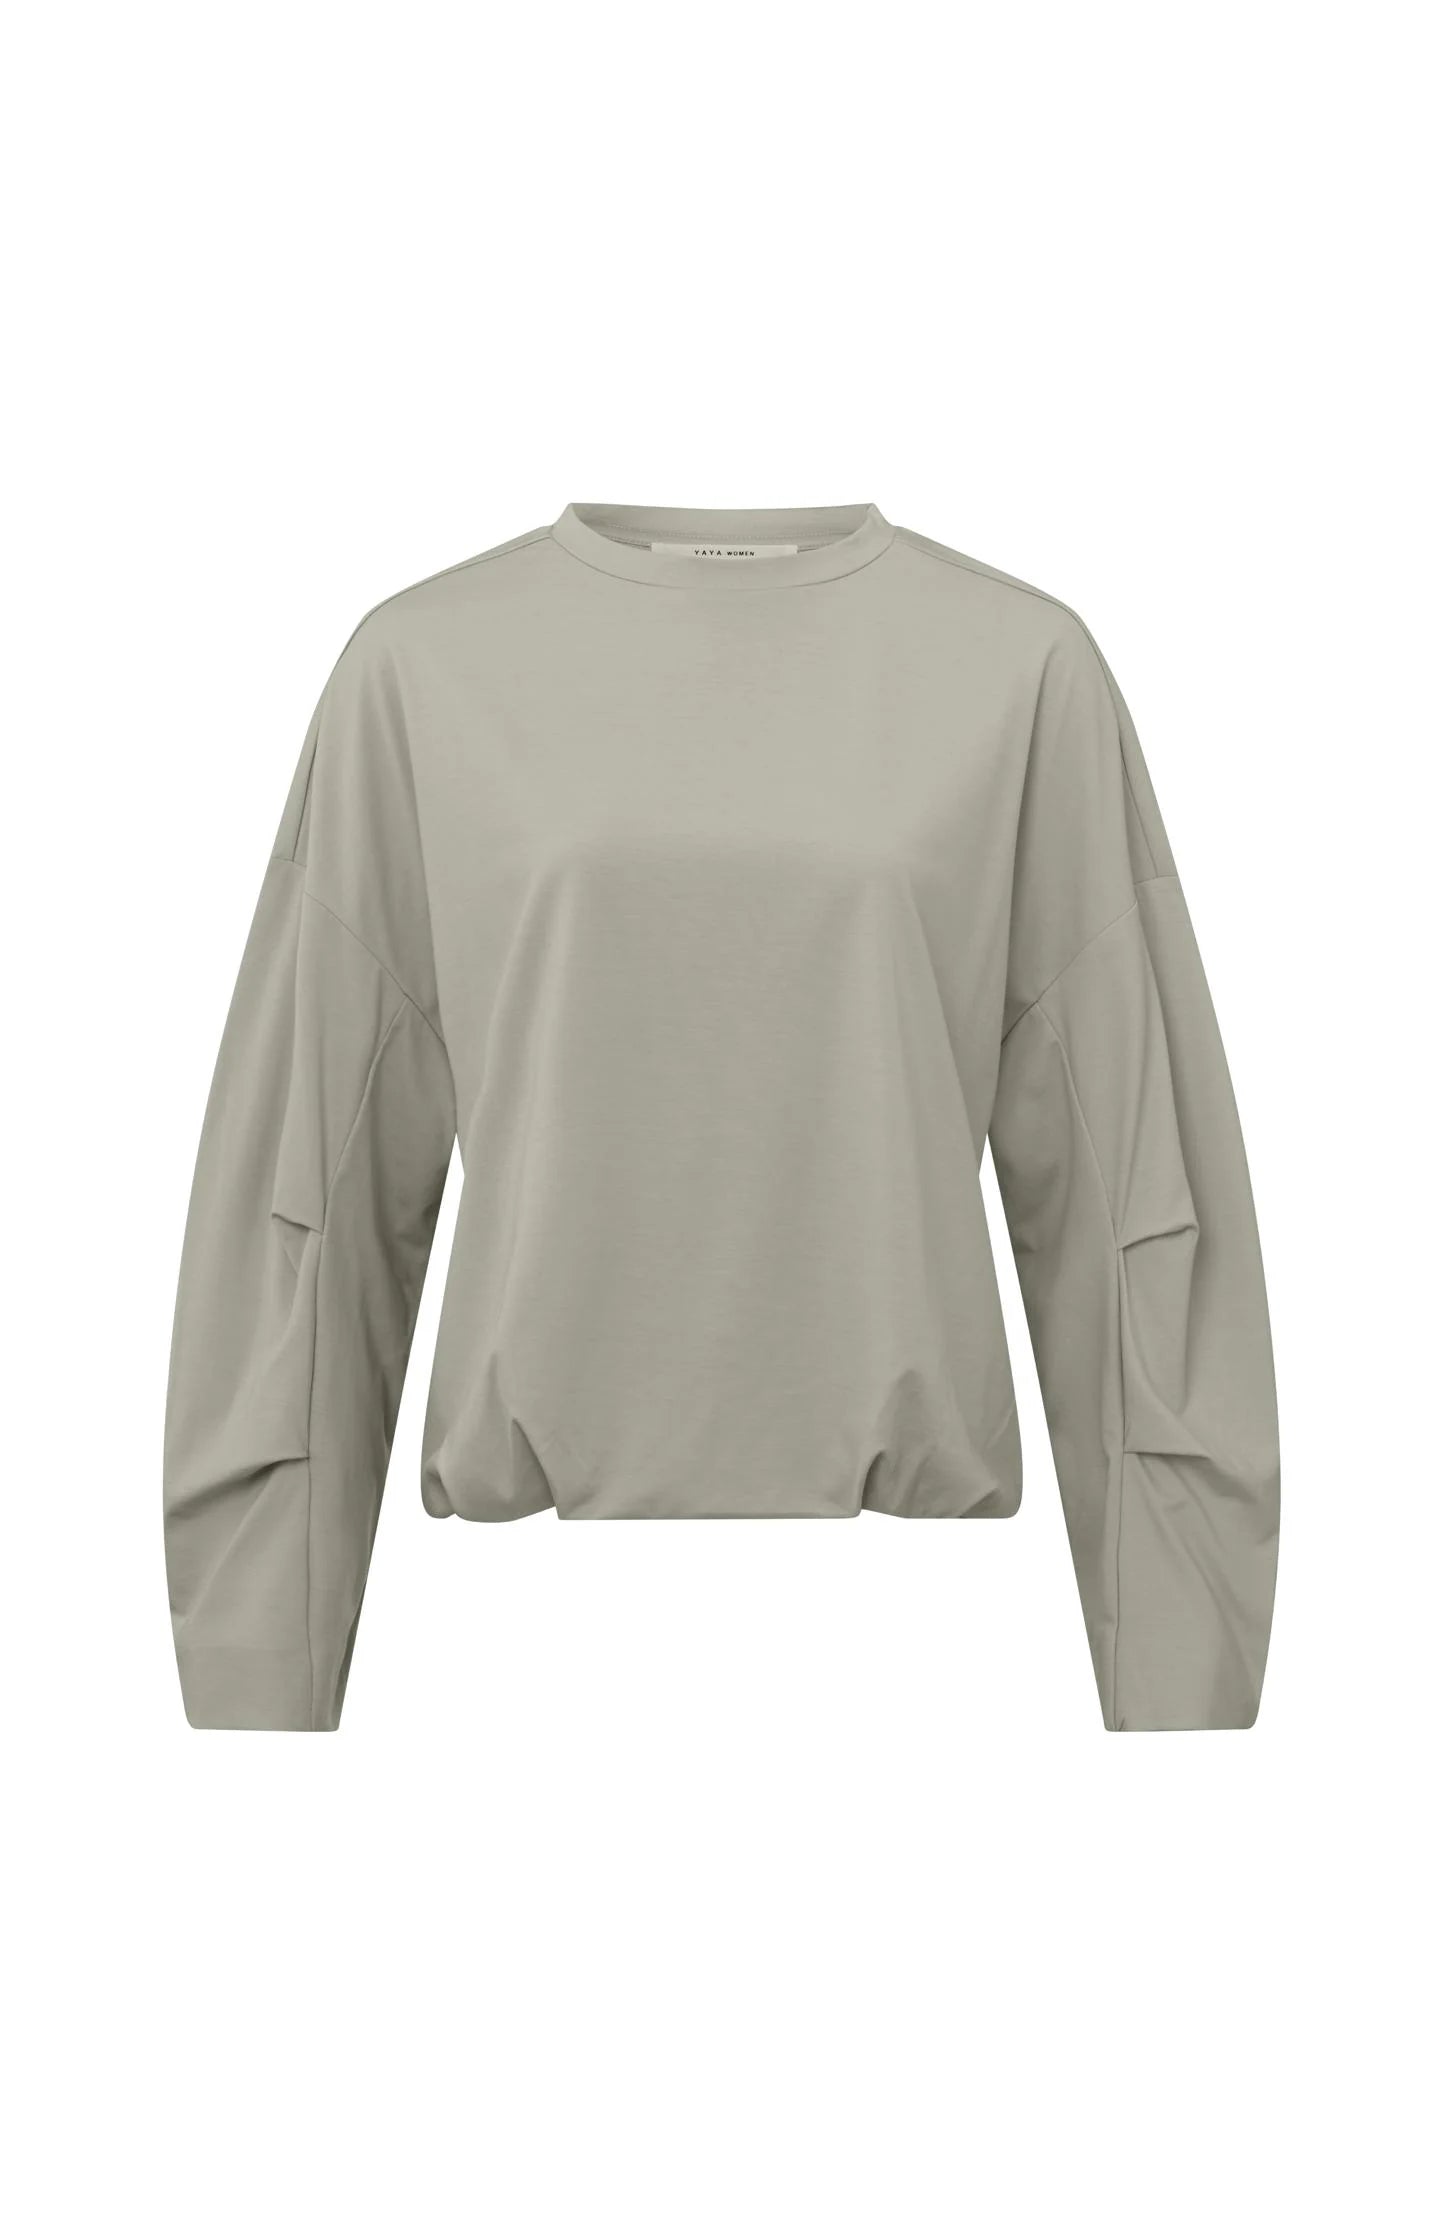 Pleated Crewneck in Agate Grey